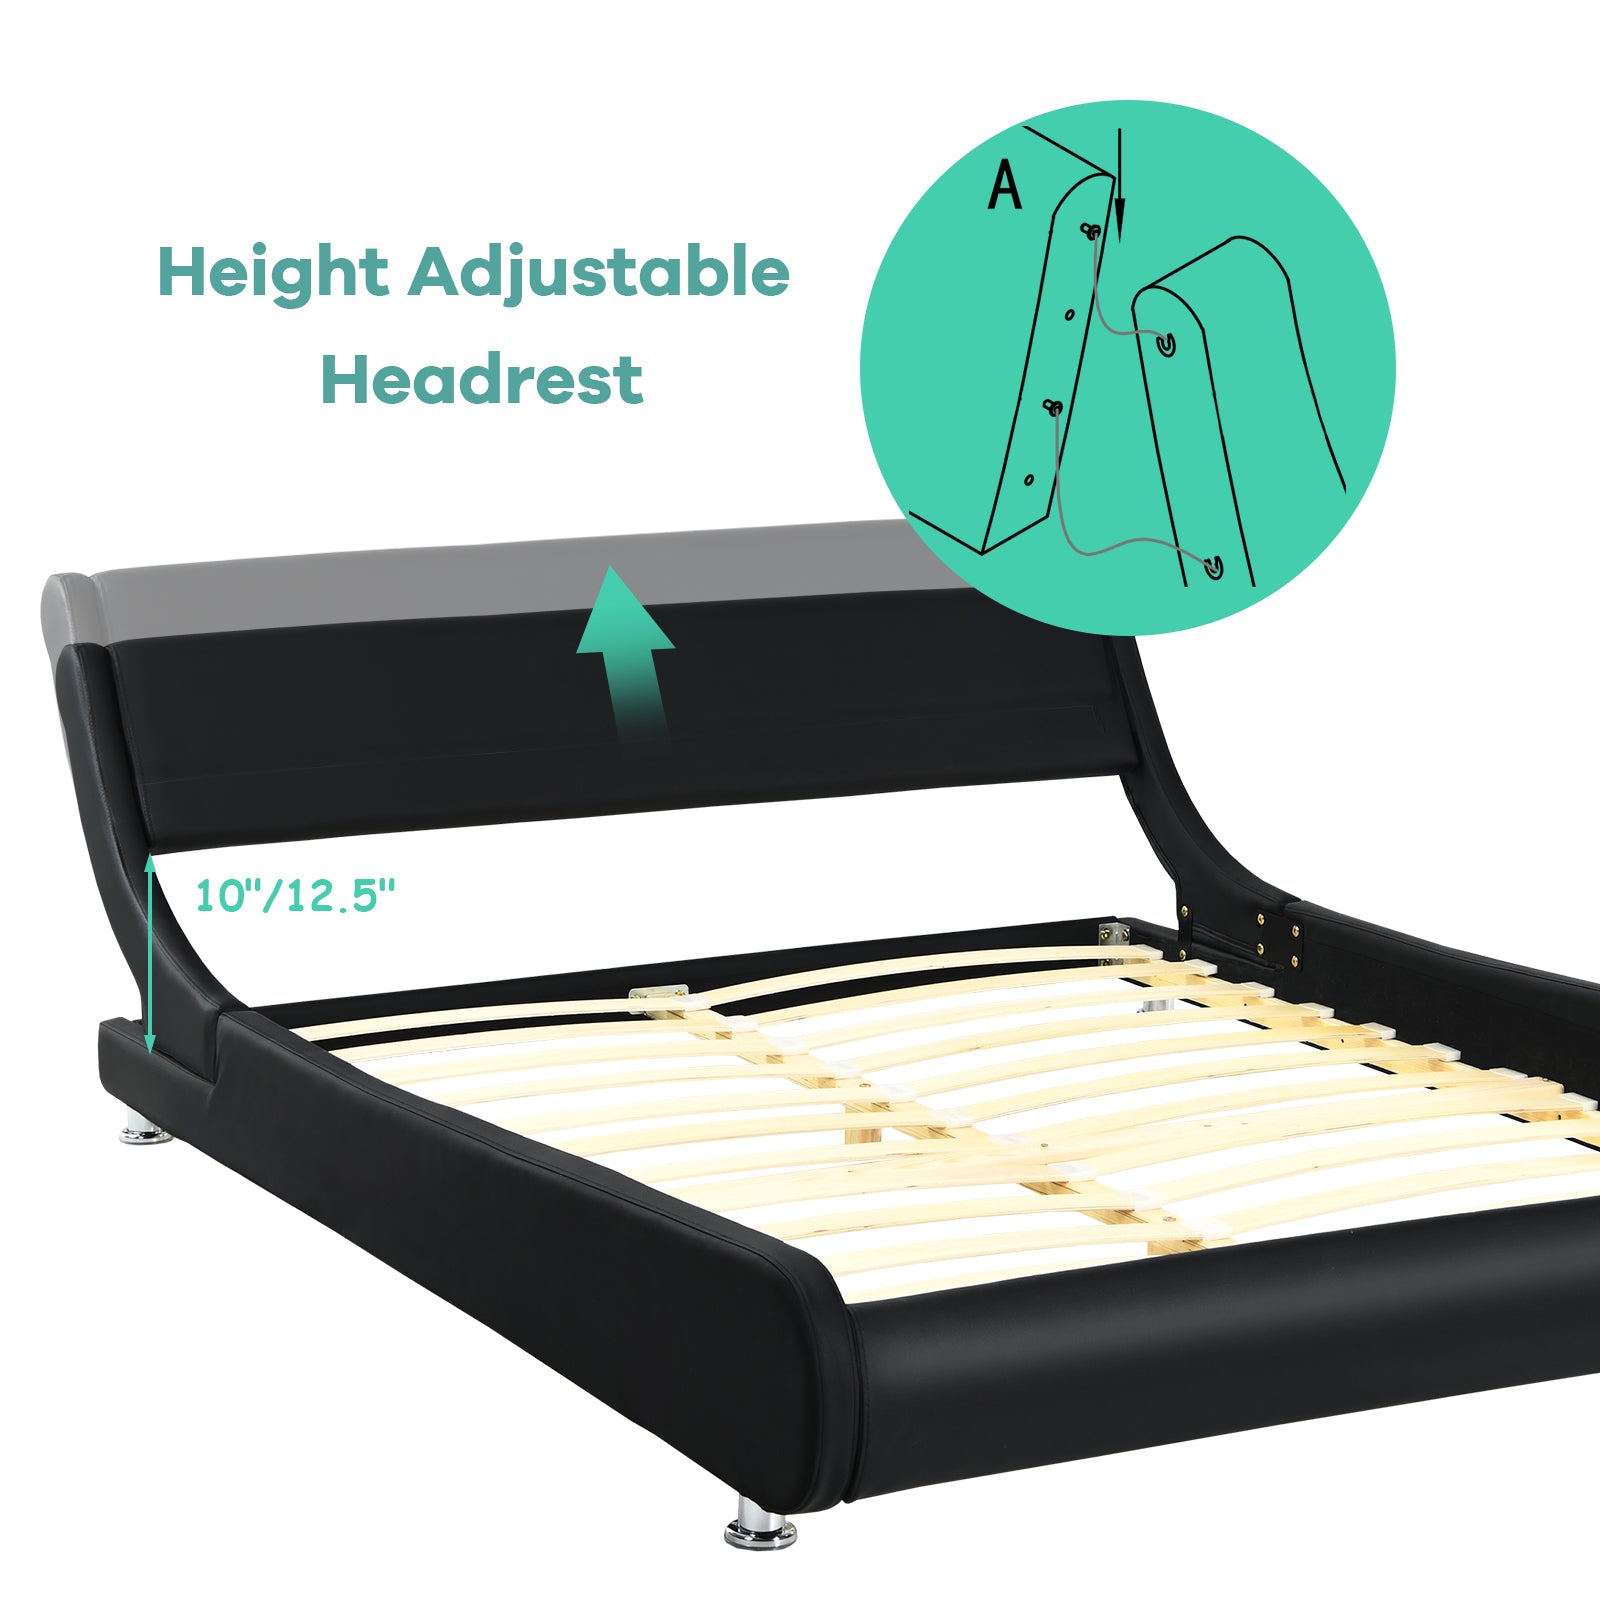 Giantex Bed Frame, Upholstered Mattress Foundation with Adjustable Headboard (Full/Queen)